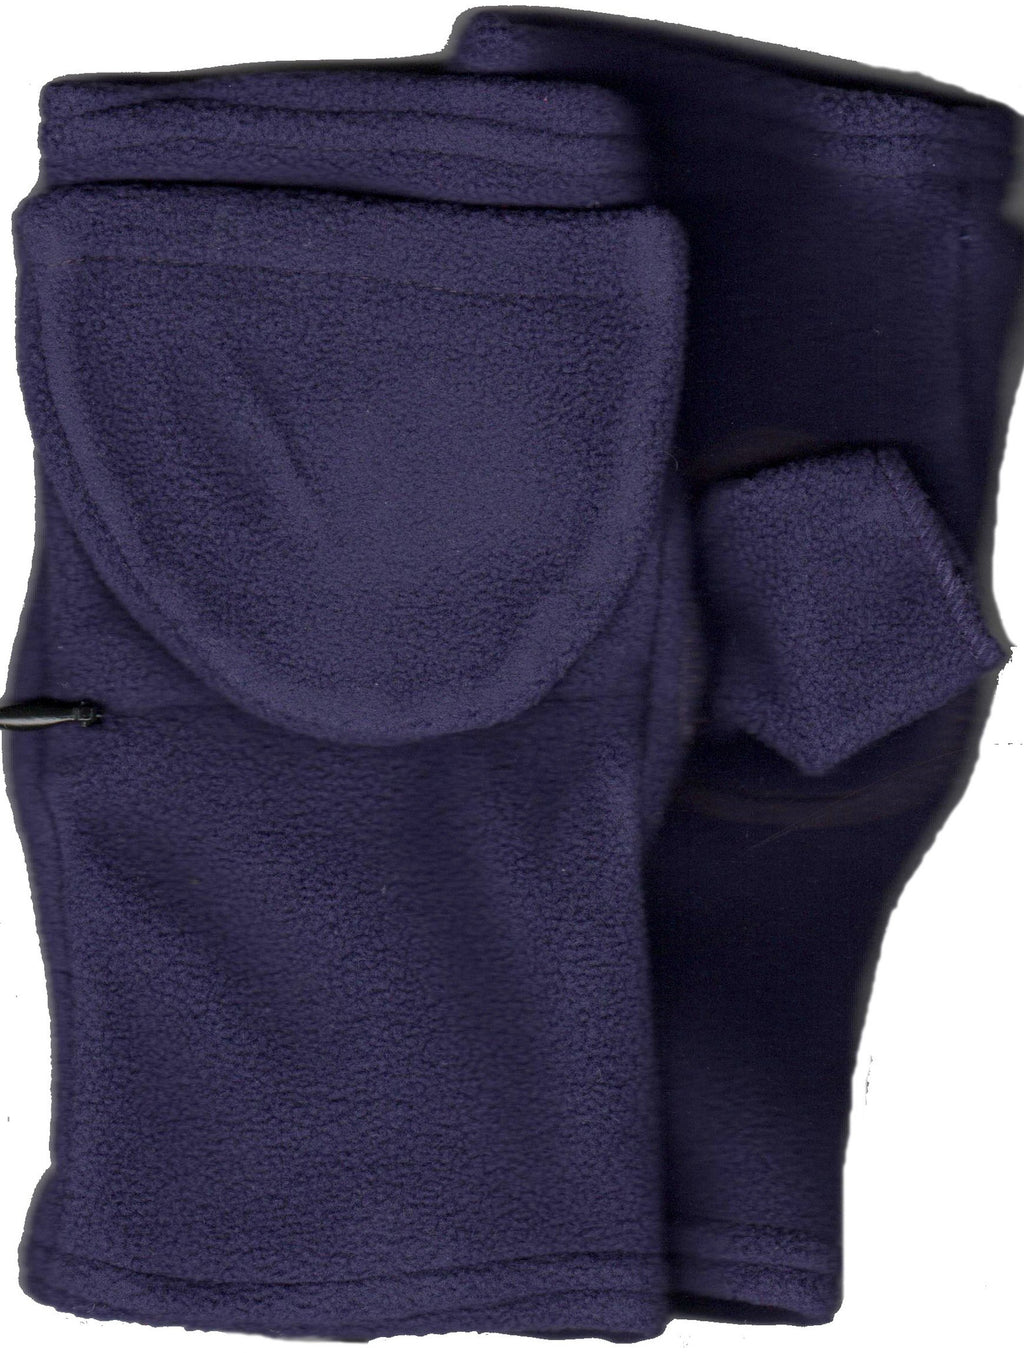 This Purple Lauer Glove is fingerless but comes with a cap that covers your fingers. When you need your hand free the magnet holds the Cap away. A Zippered Pocket holds cash or keys.